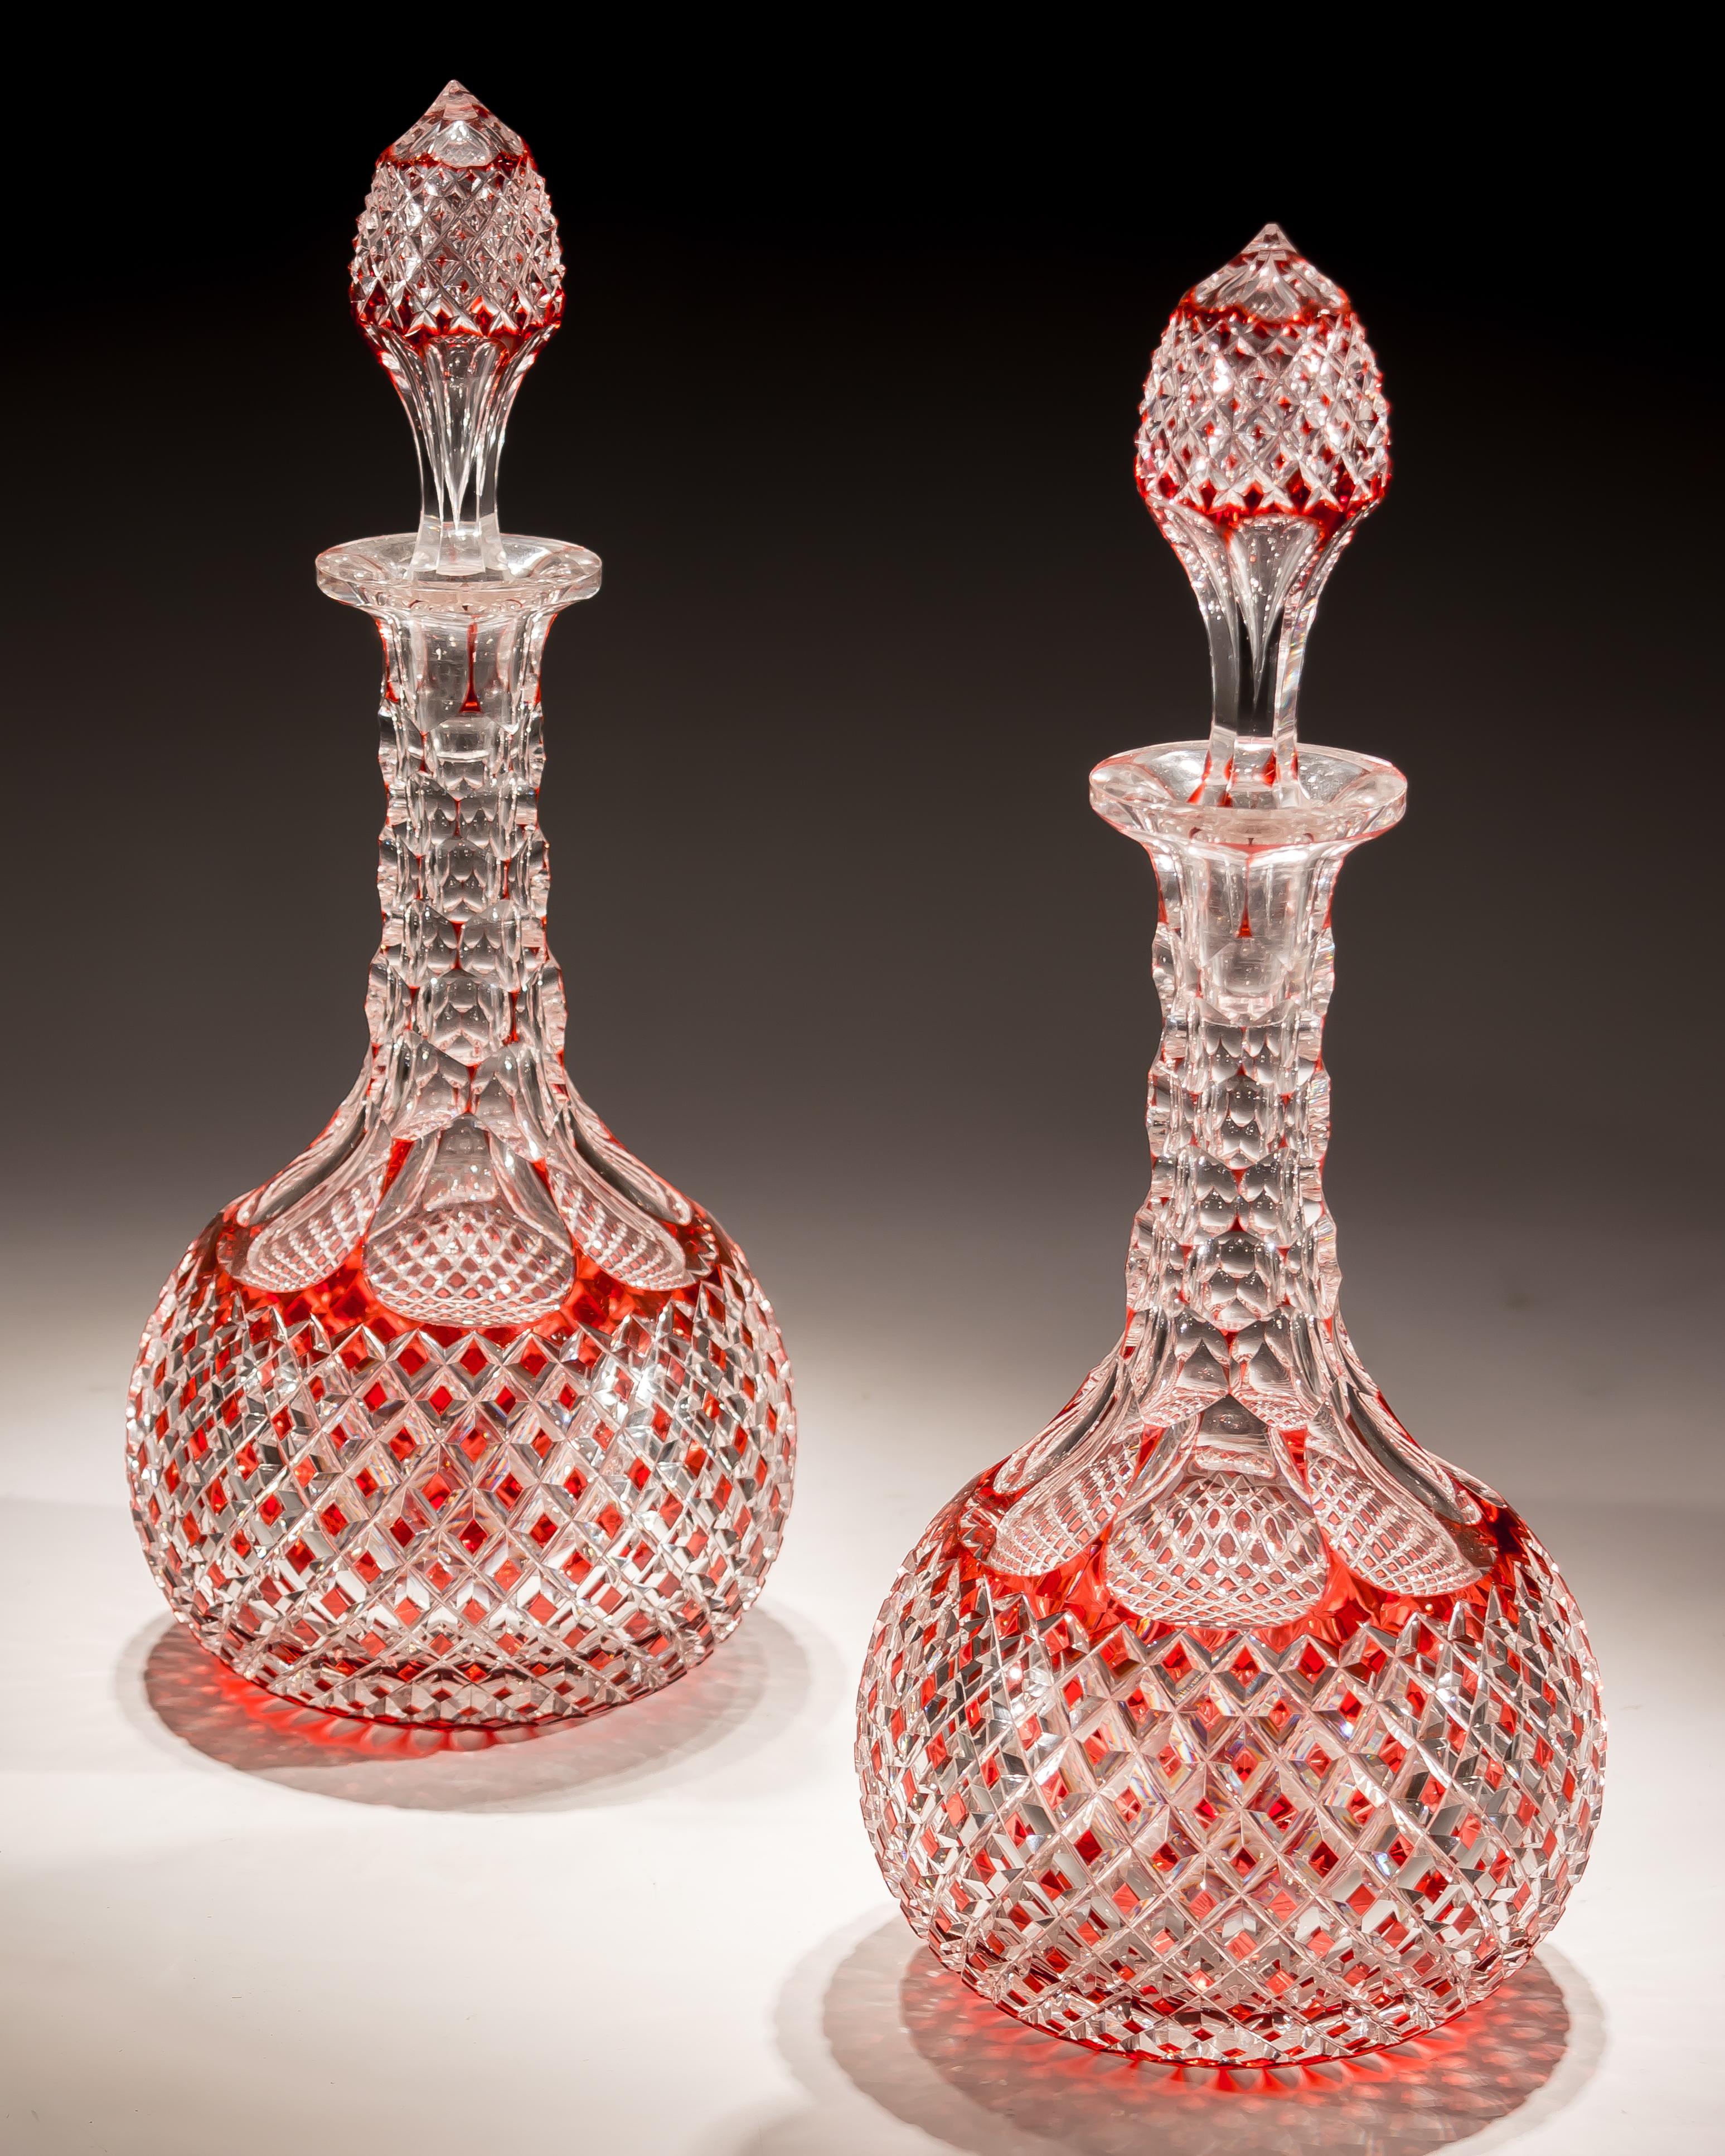 A fine Victorian red overlay suite consisting of a pair of elaborately cut glass decanters and seven matching wine glasses.

Wine glasses
H 12cm / 4.75